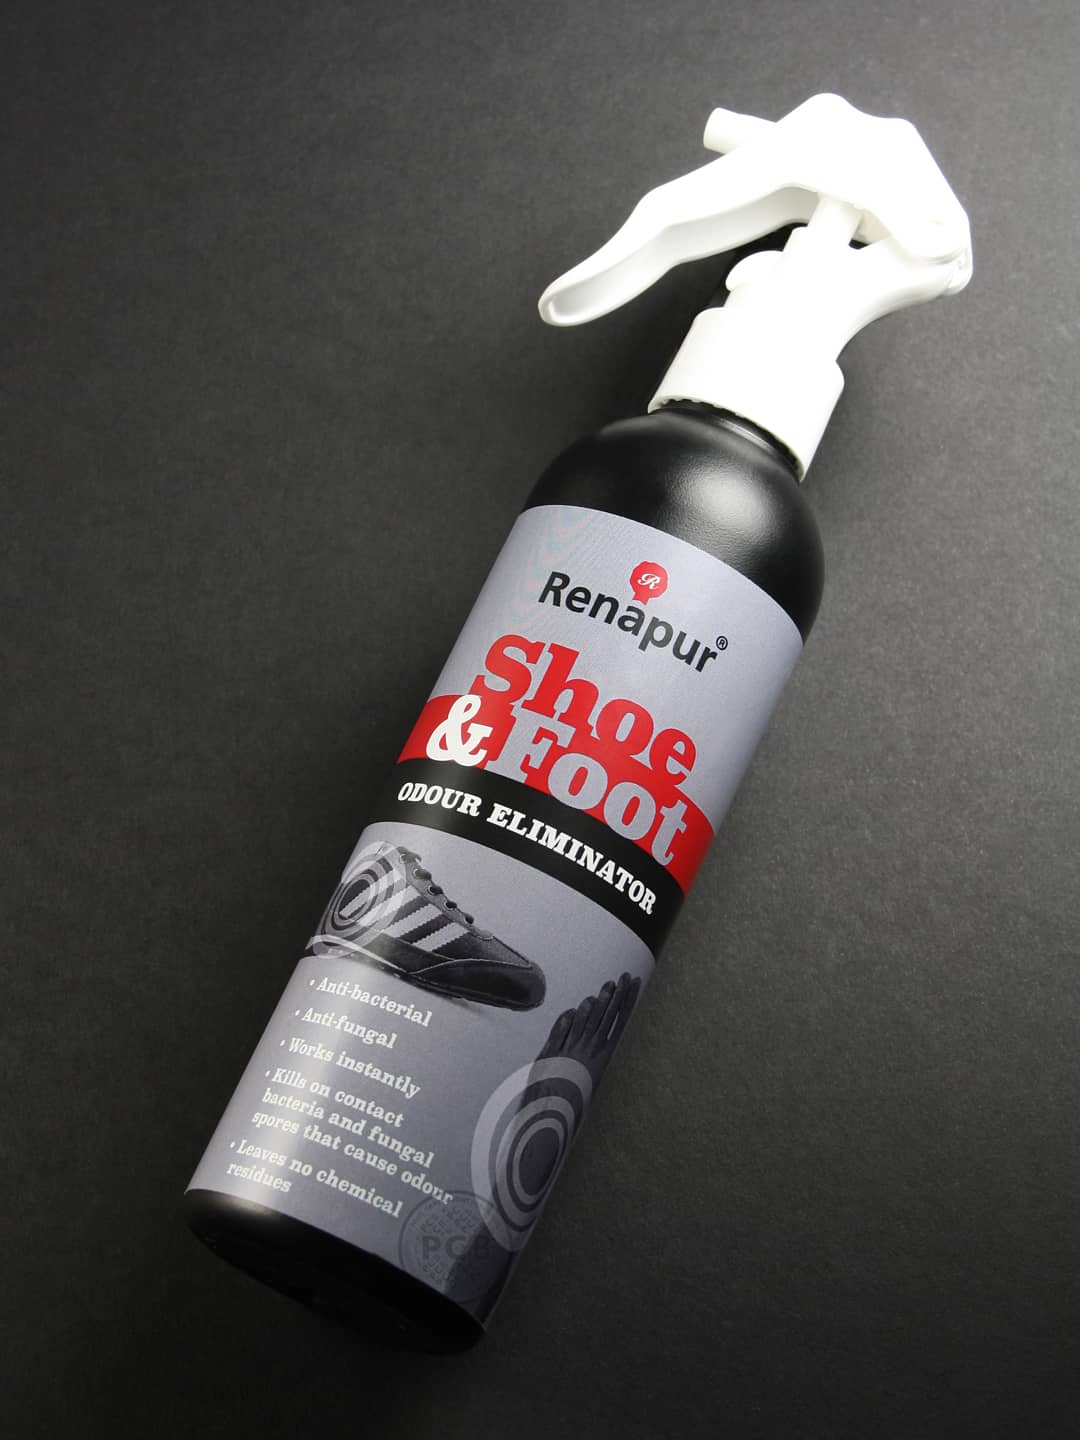 Shoe and foot odour eliminator product label graphics – designed by Paul Cartwright Branding.